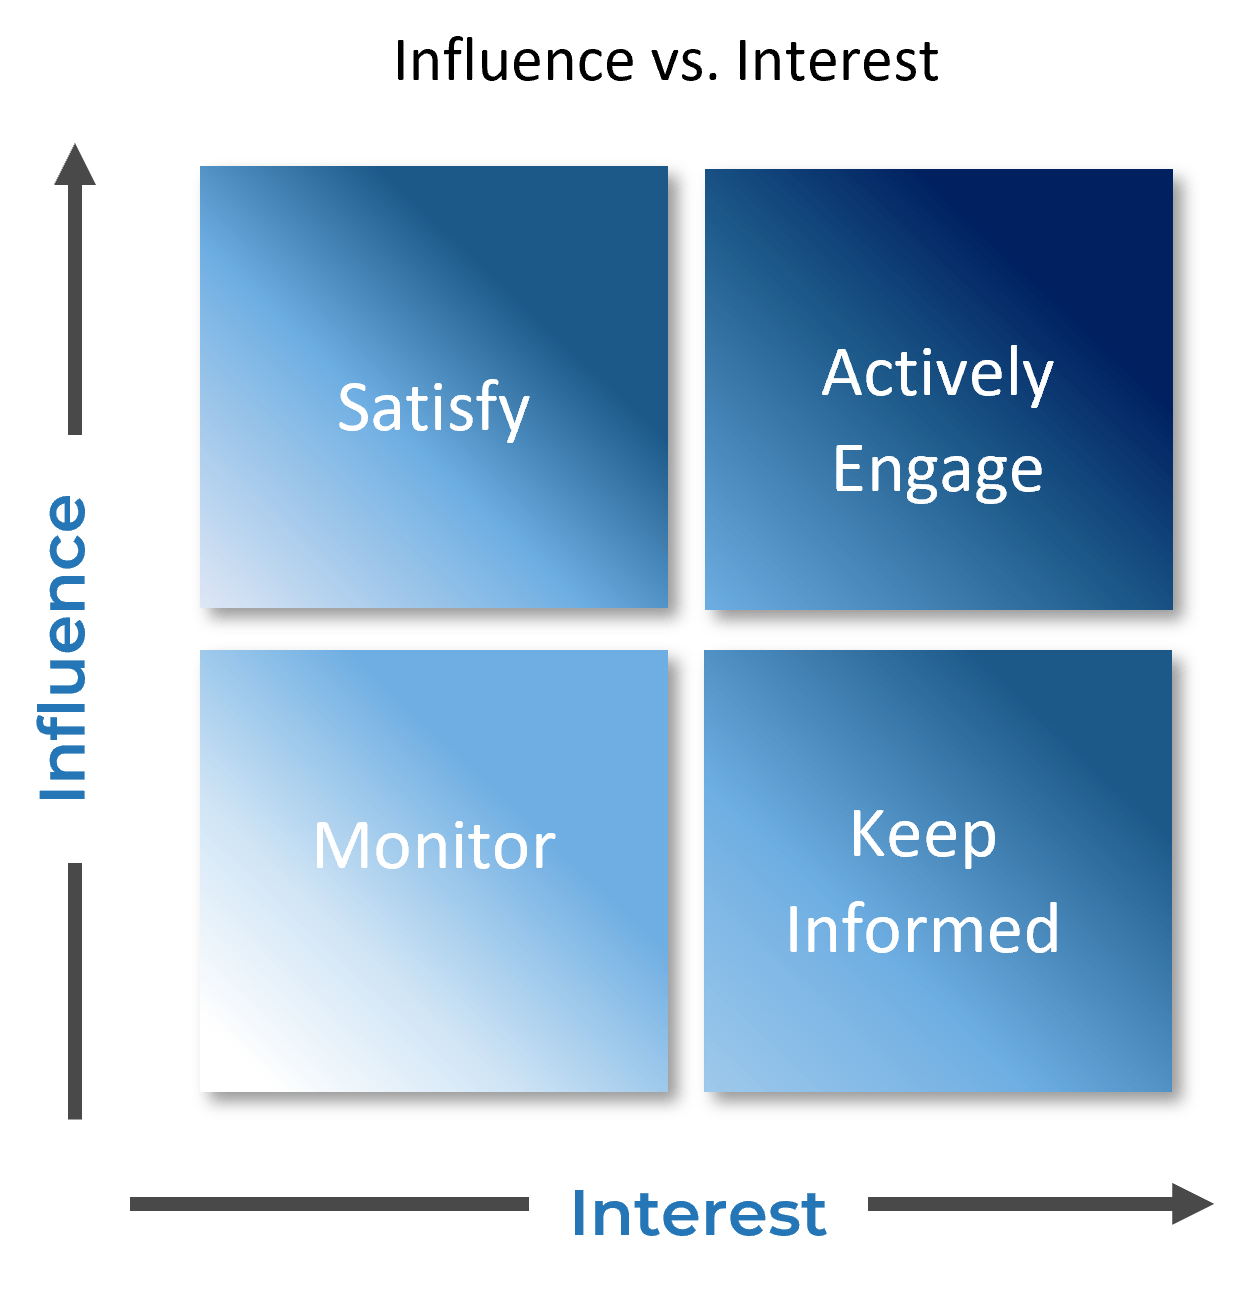 A graph that shows influence vs interest.